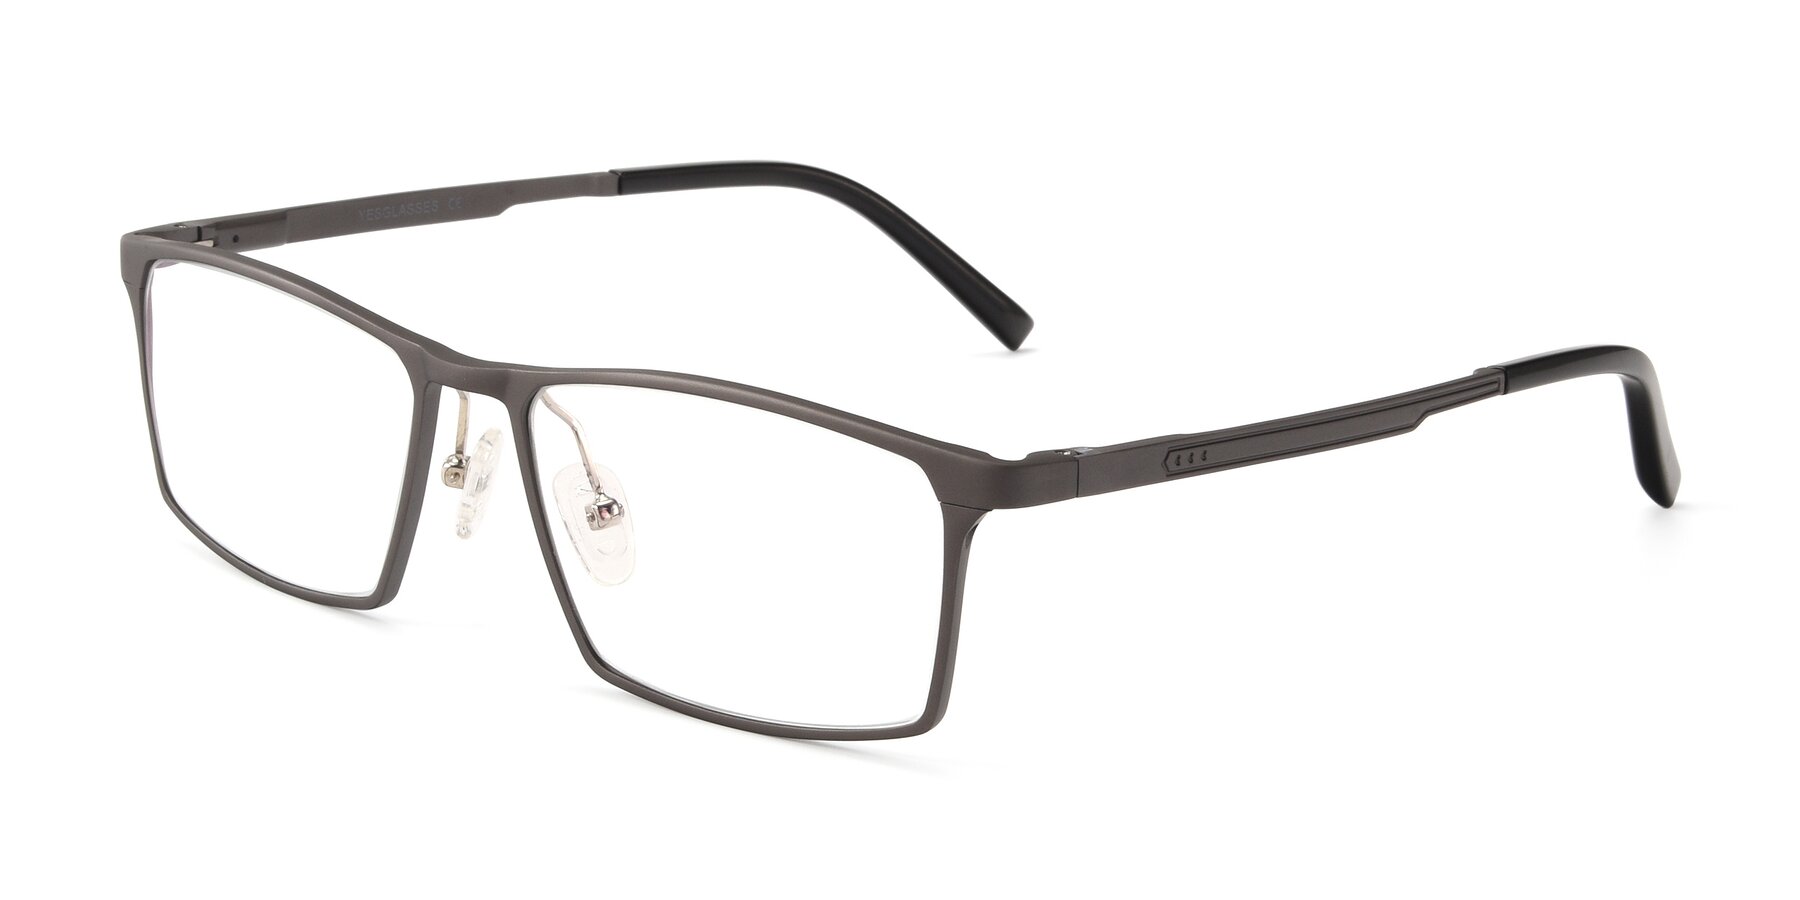 Angle of CX6341 in Gunmental with Clear Reading Eyeglass Lenses